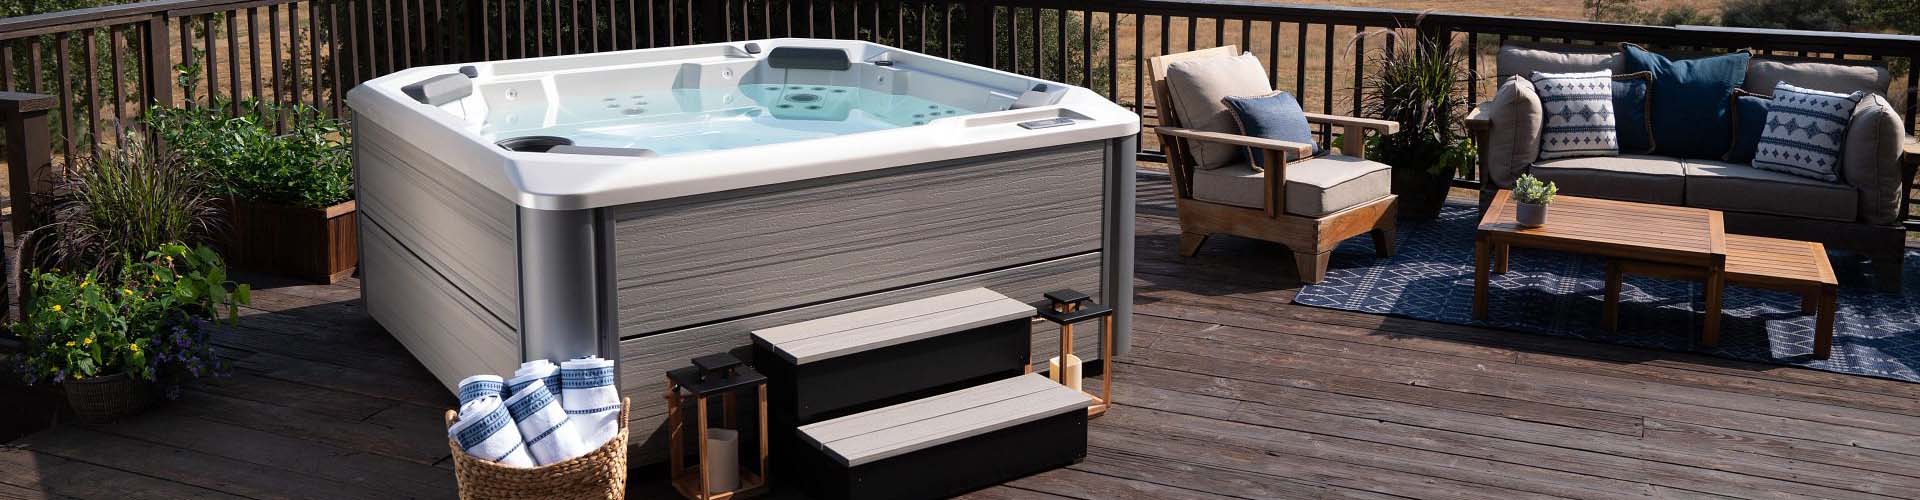 How to Choose Your Hot Tub Foundation